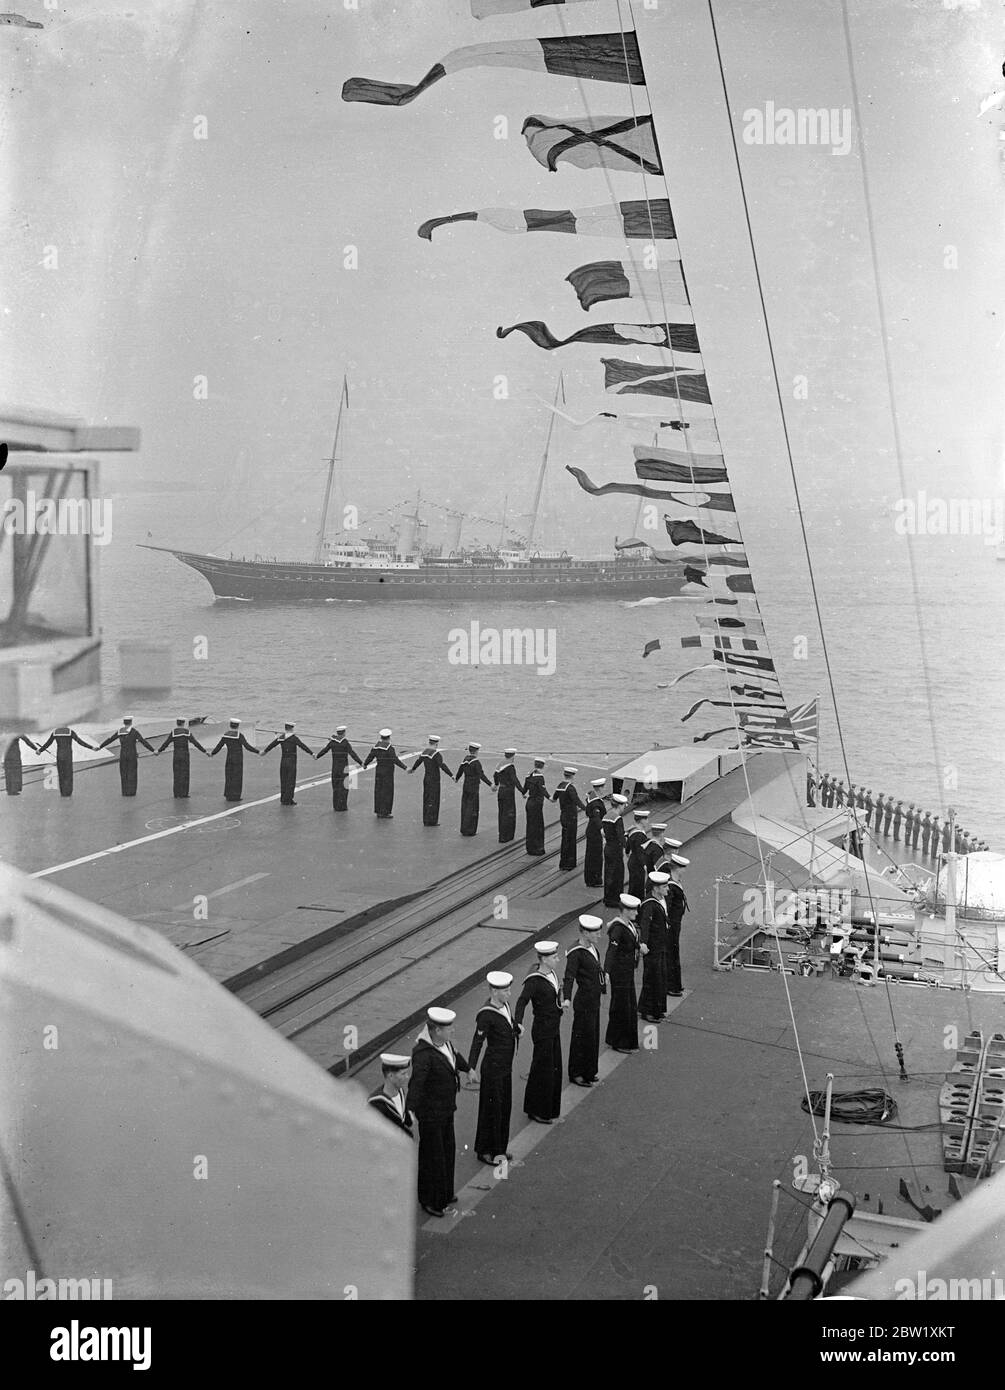 The King reviews fleet at Spithead. Aboard the Royal yacht, 'Victoria and Albert', the King passed through the 5 mile line of 160 warships and merchant vessels when he made his Coronation review of the British Navy and Mercantile Marine at Spithead. Nearly 300 ships, including 17 from the foreign fleets, were reviewed. Photo shows, the Royal yacht 'Victoria and Albert' passing the aircraft carrier HMS Glorious as the crew dressed ship. 20 May 1937 Stock Photo